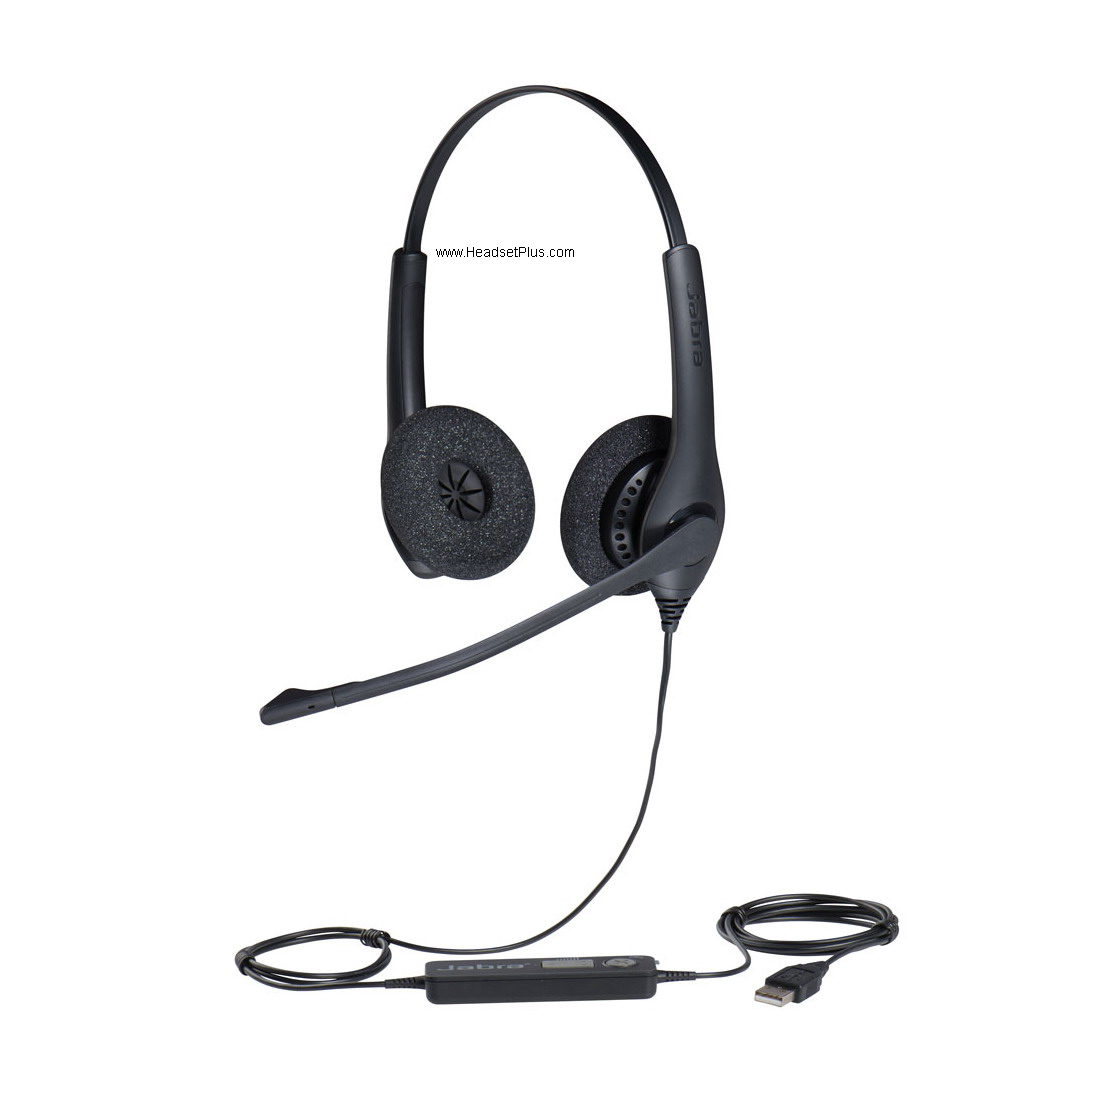 Usb Headset Voip Headsets Unified Communication Softphone Headsets